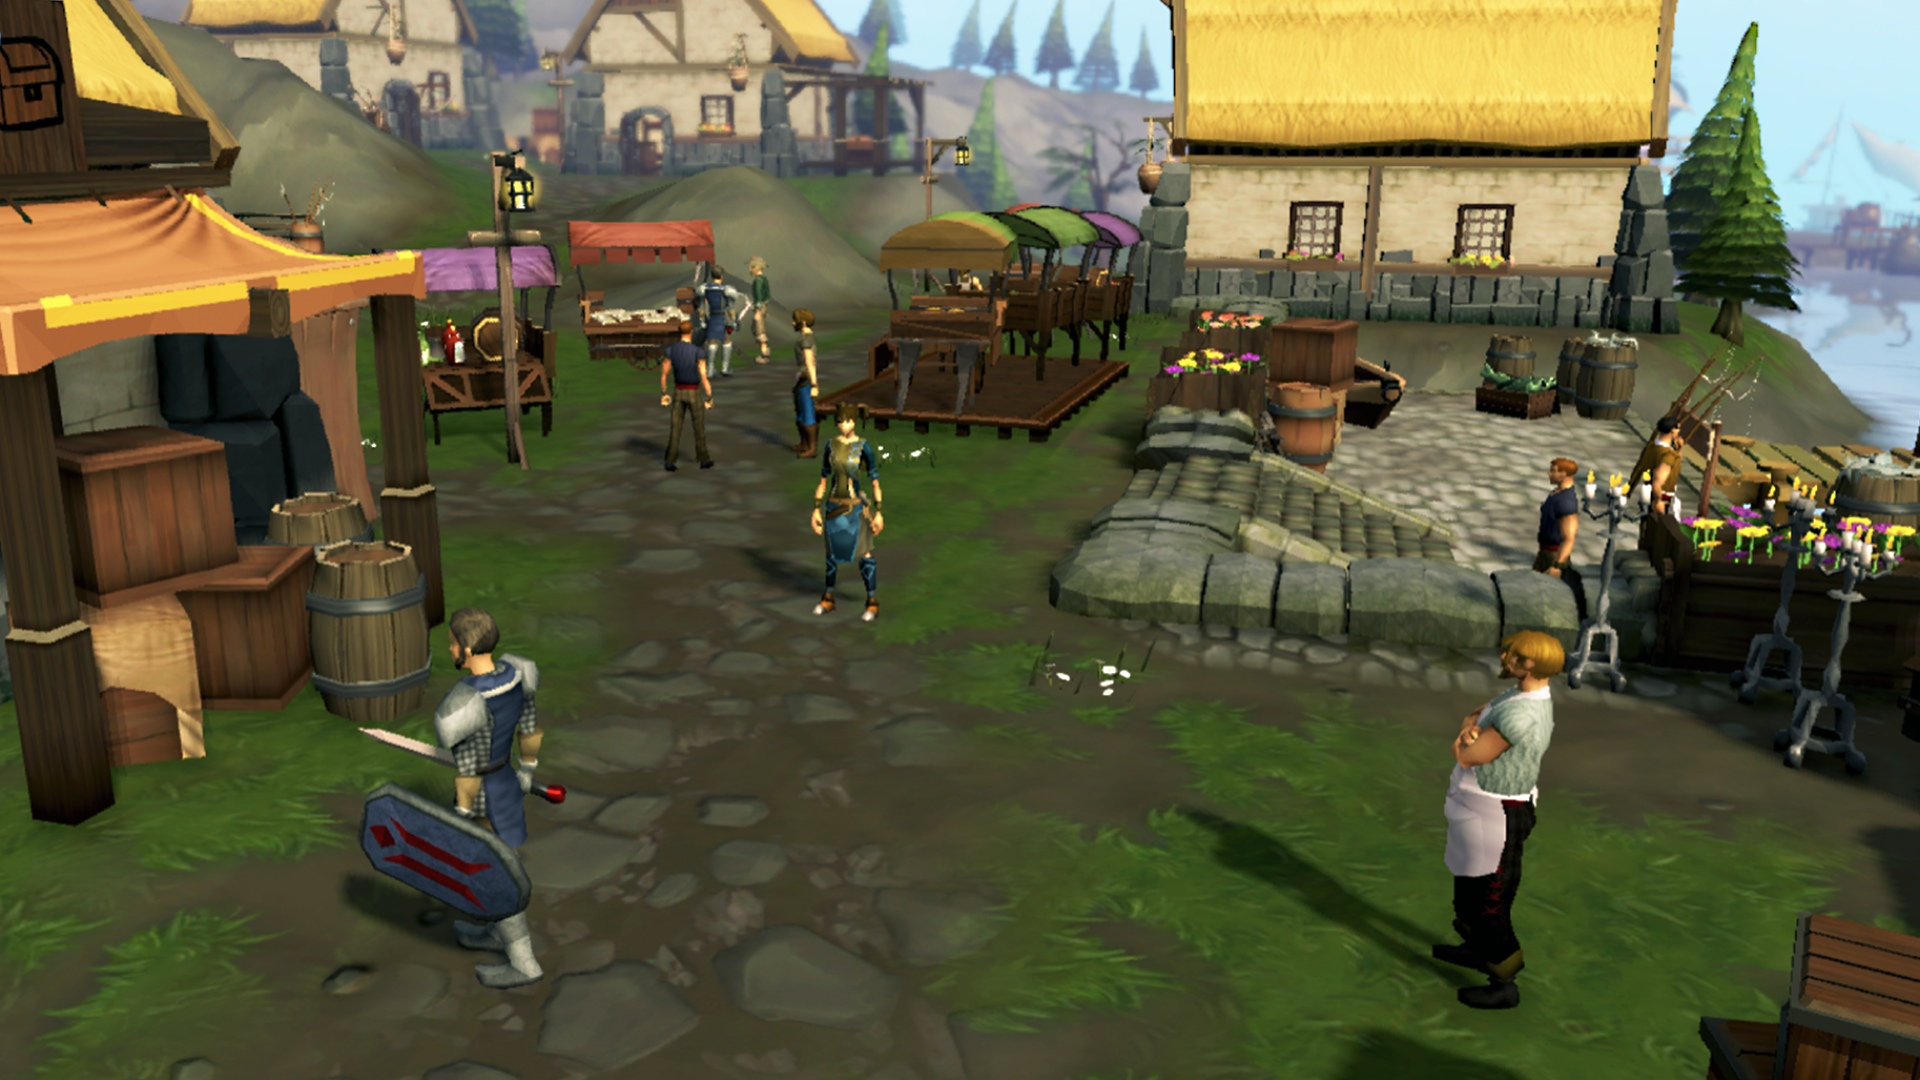 RuneScape - If you're looking for RuneScape guides, gameplay and